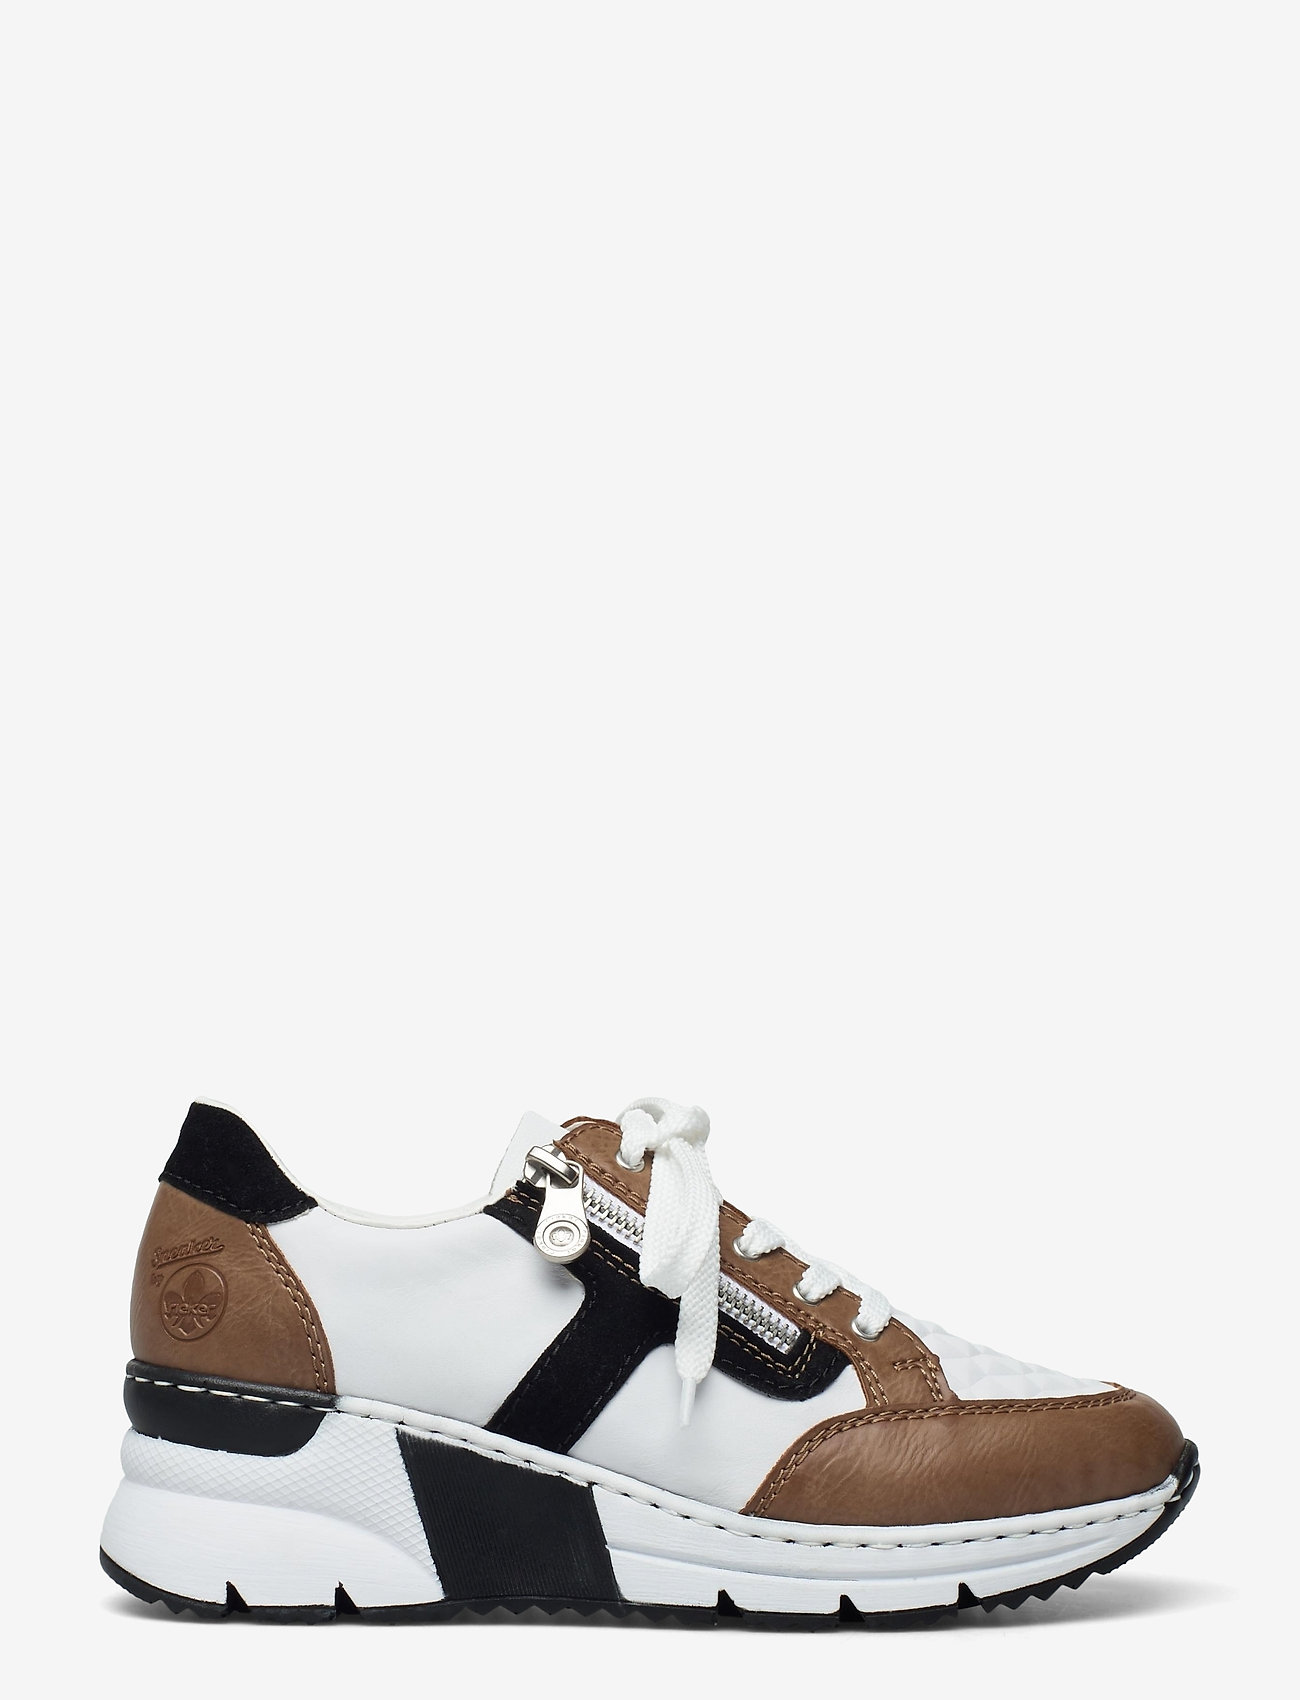 N6303-64 - Lave sneakers | Boozt.com